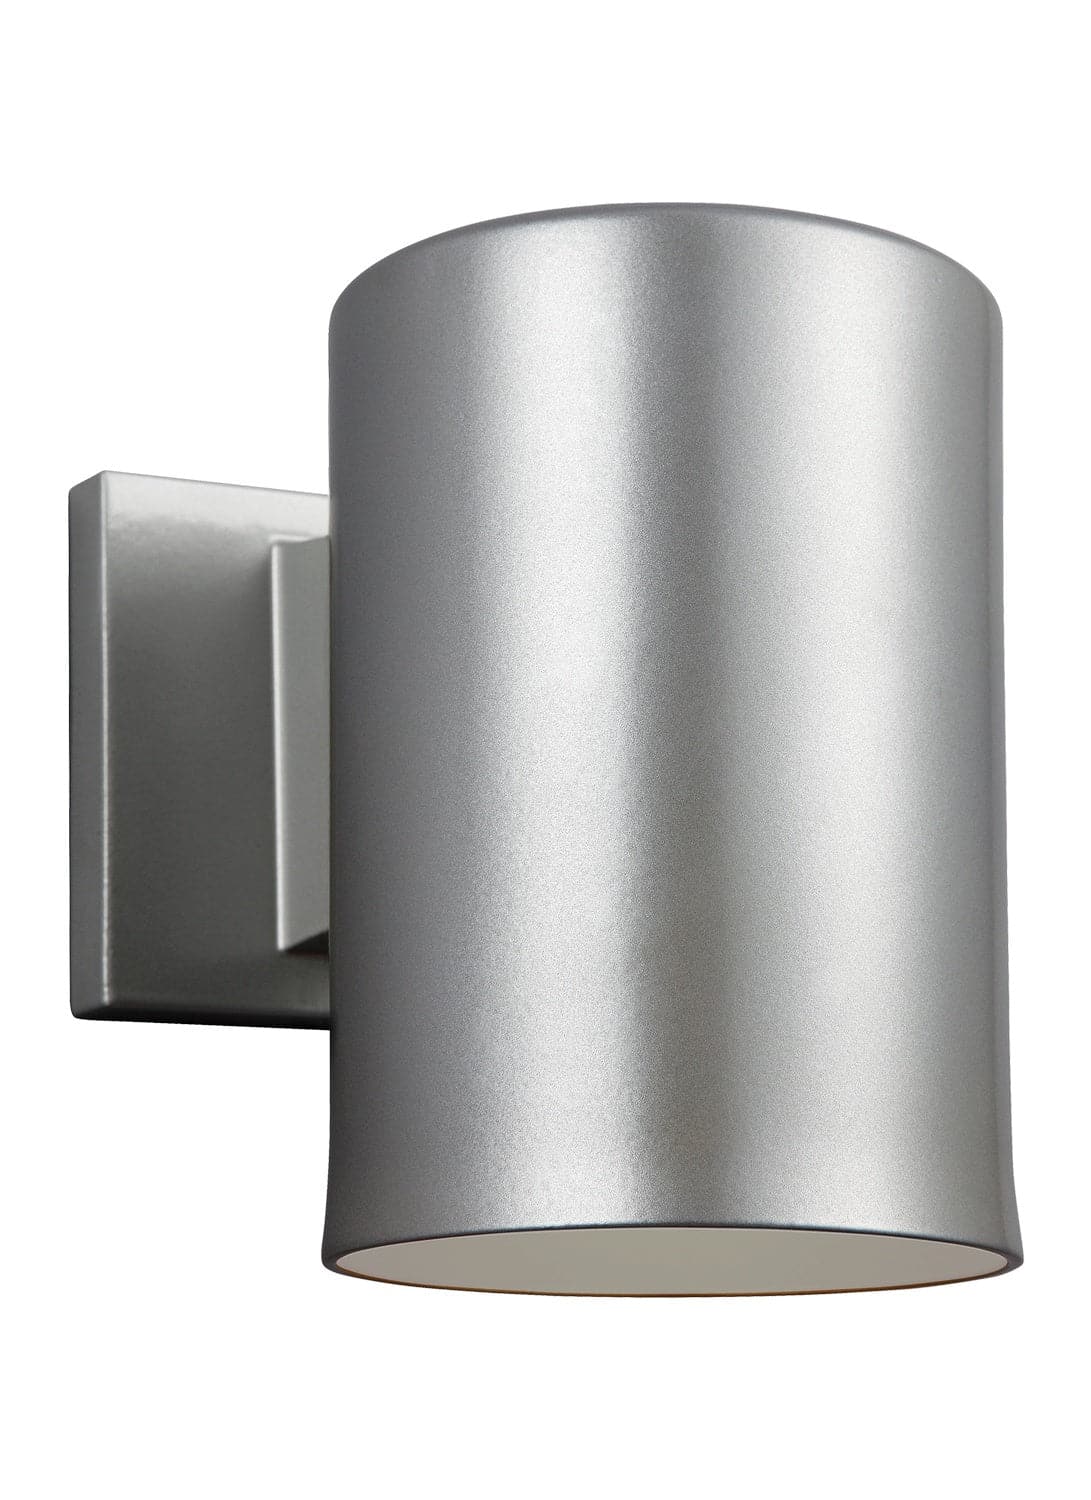 Visual Comfort Studio - 8313801-753 - One Light Outdoor Wall Lantern - Outdoor Cylinders - Painted Brushed Nickel